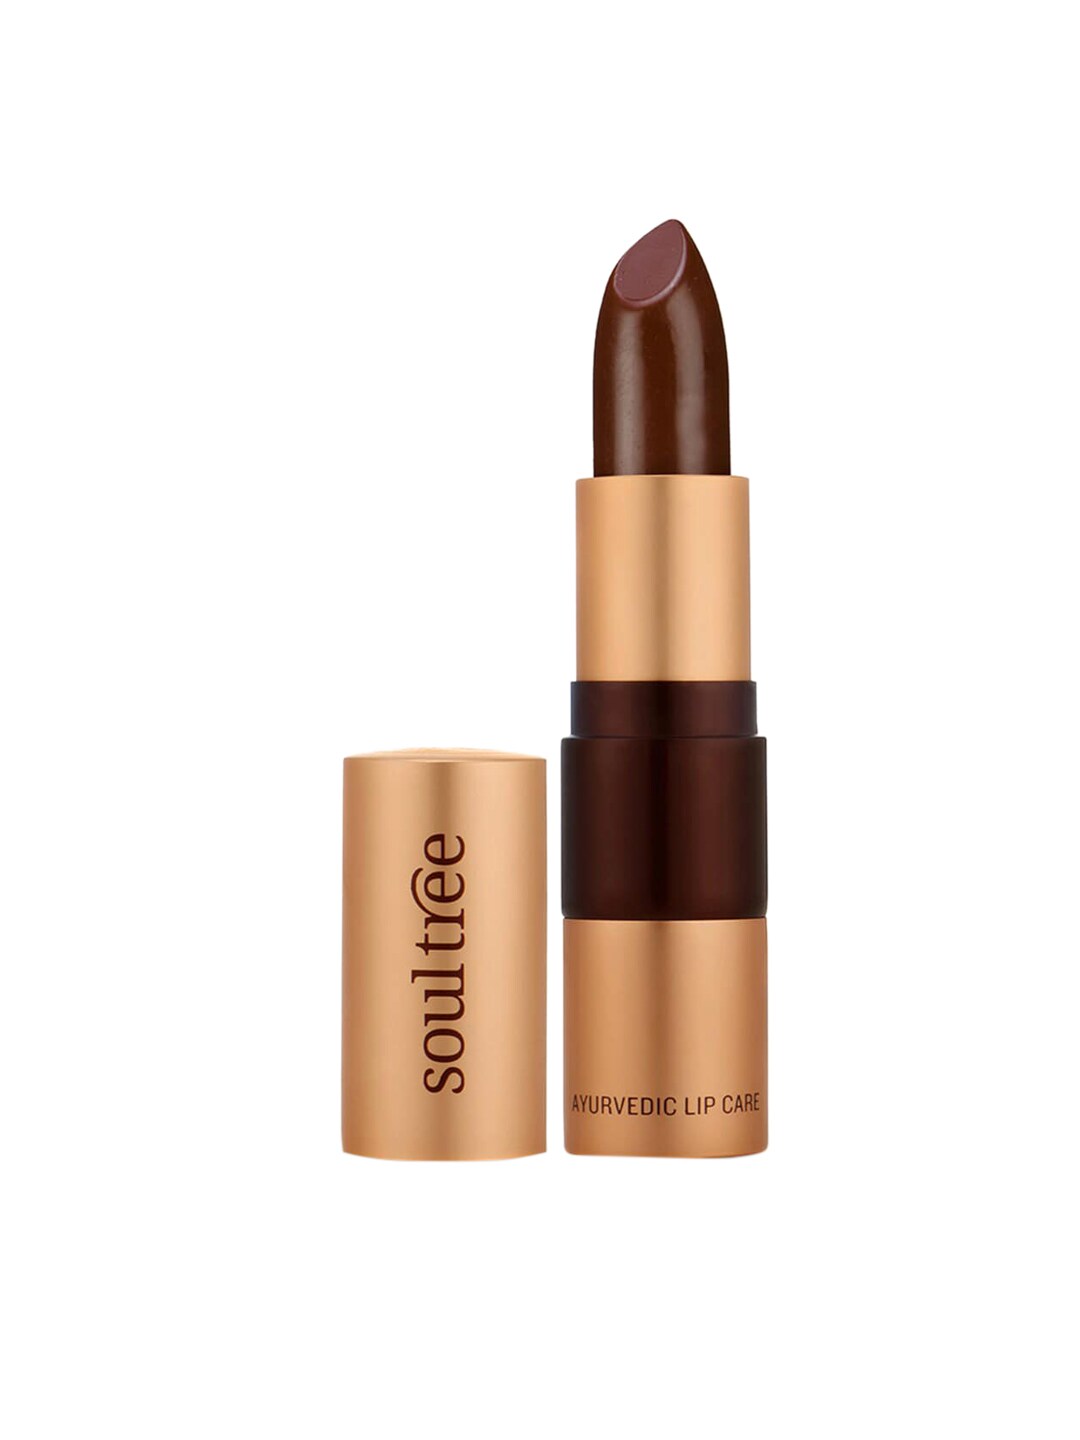 Soultree Ayurvedic Lipstick - Creamy Cacao 815 - 4gm Price in India